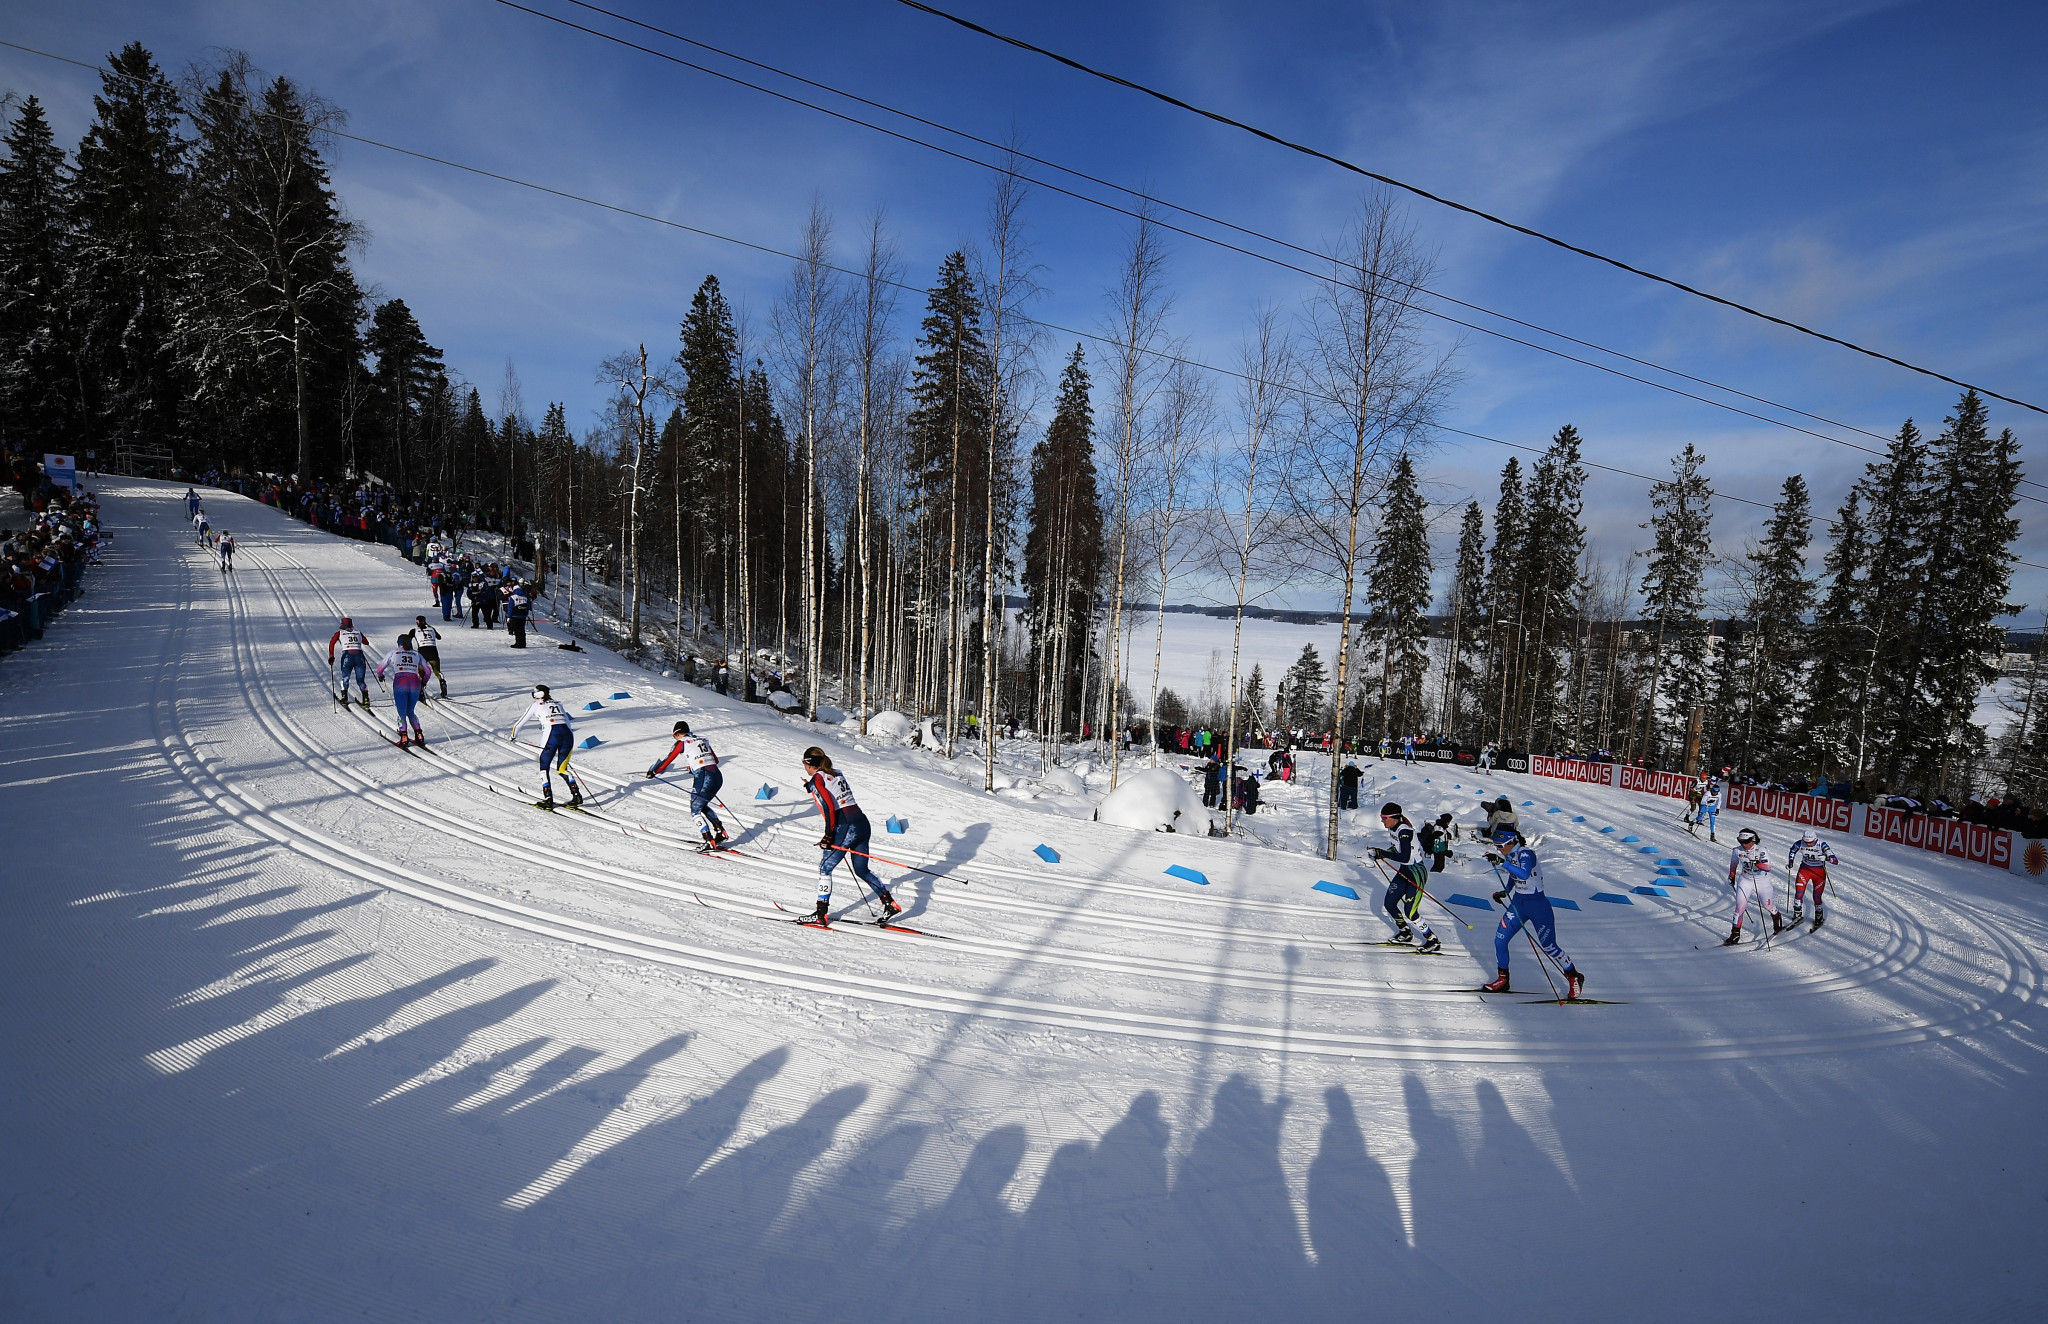 Lahti is set to host the second Finnish stop of the Cross-Country World Cup after Ruka staged the season's opening leg ©Getty Images